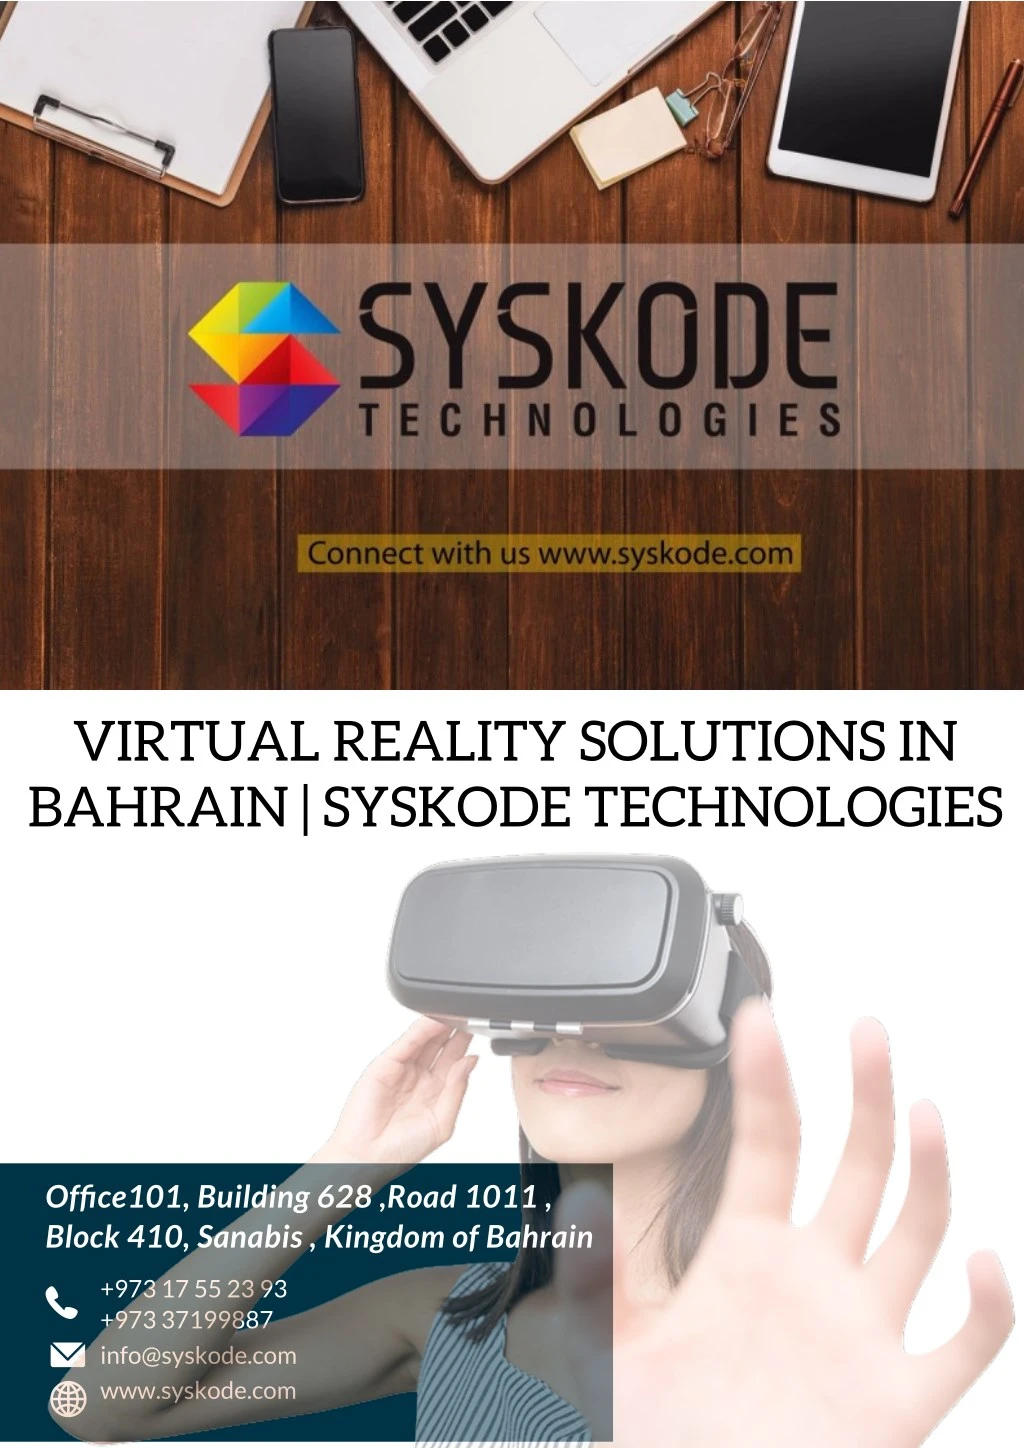 virtual reality solutions in bahrain syskode